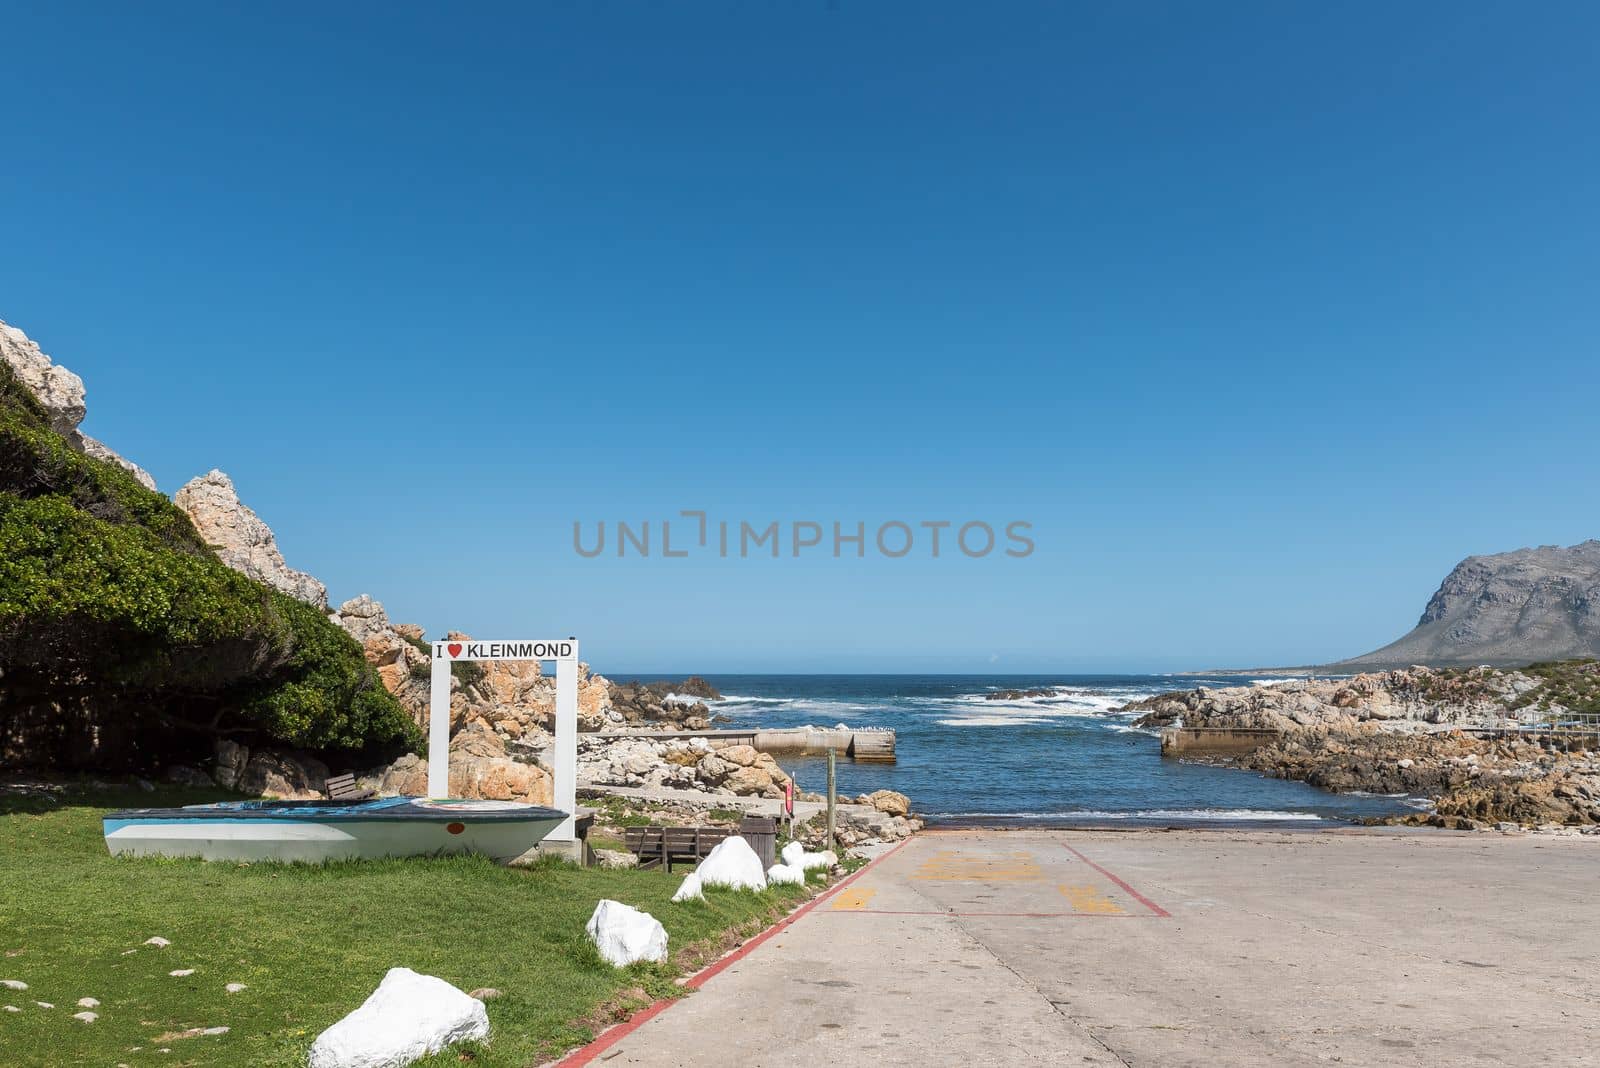 Harbour at Kleinmond in the Western Cape Province Overberg Region by dpreezg